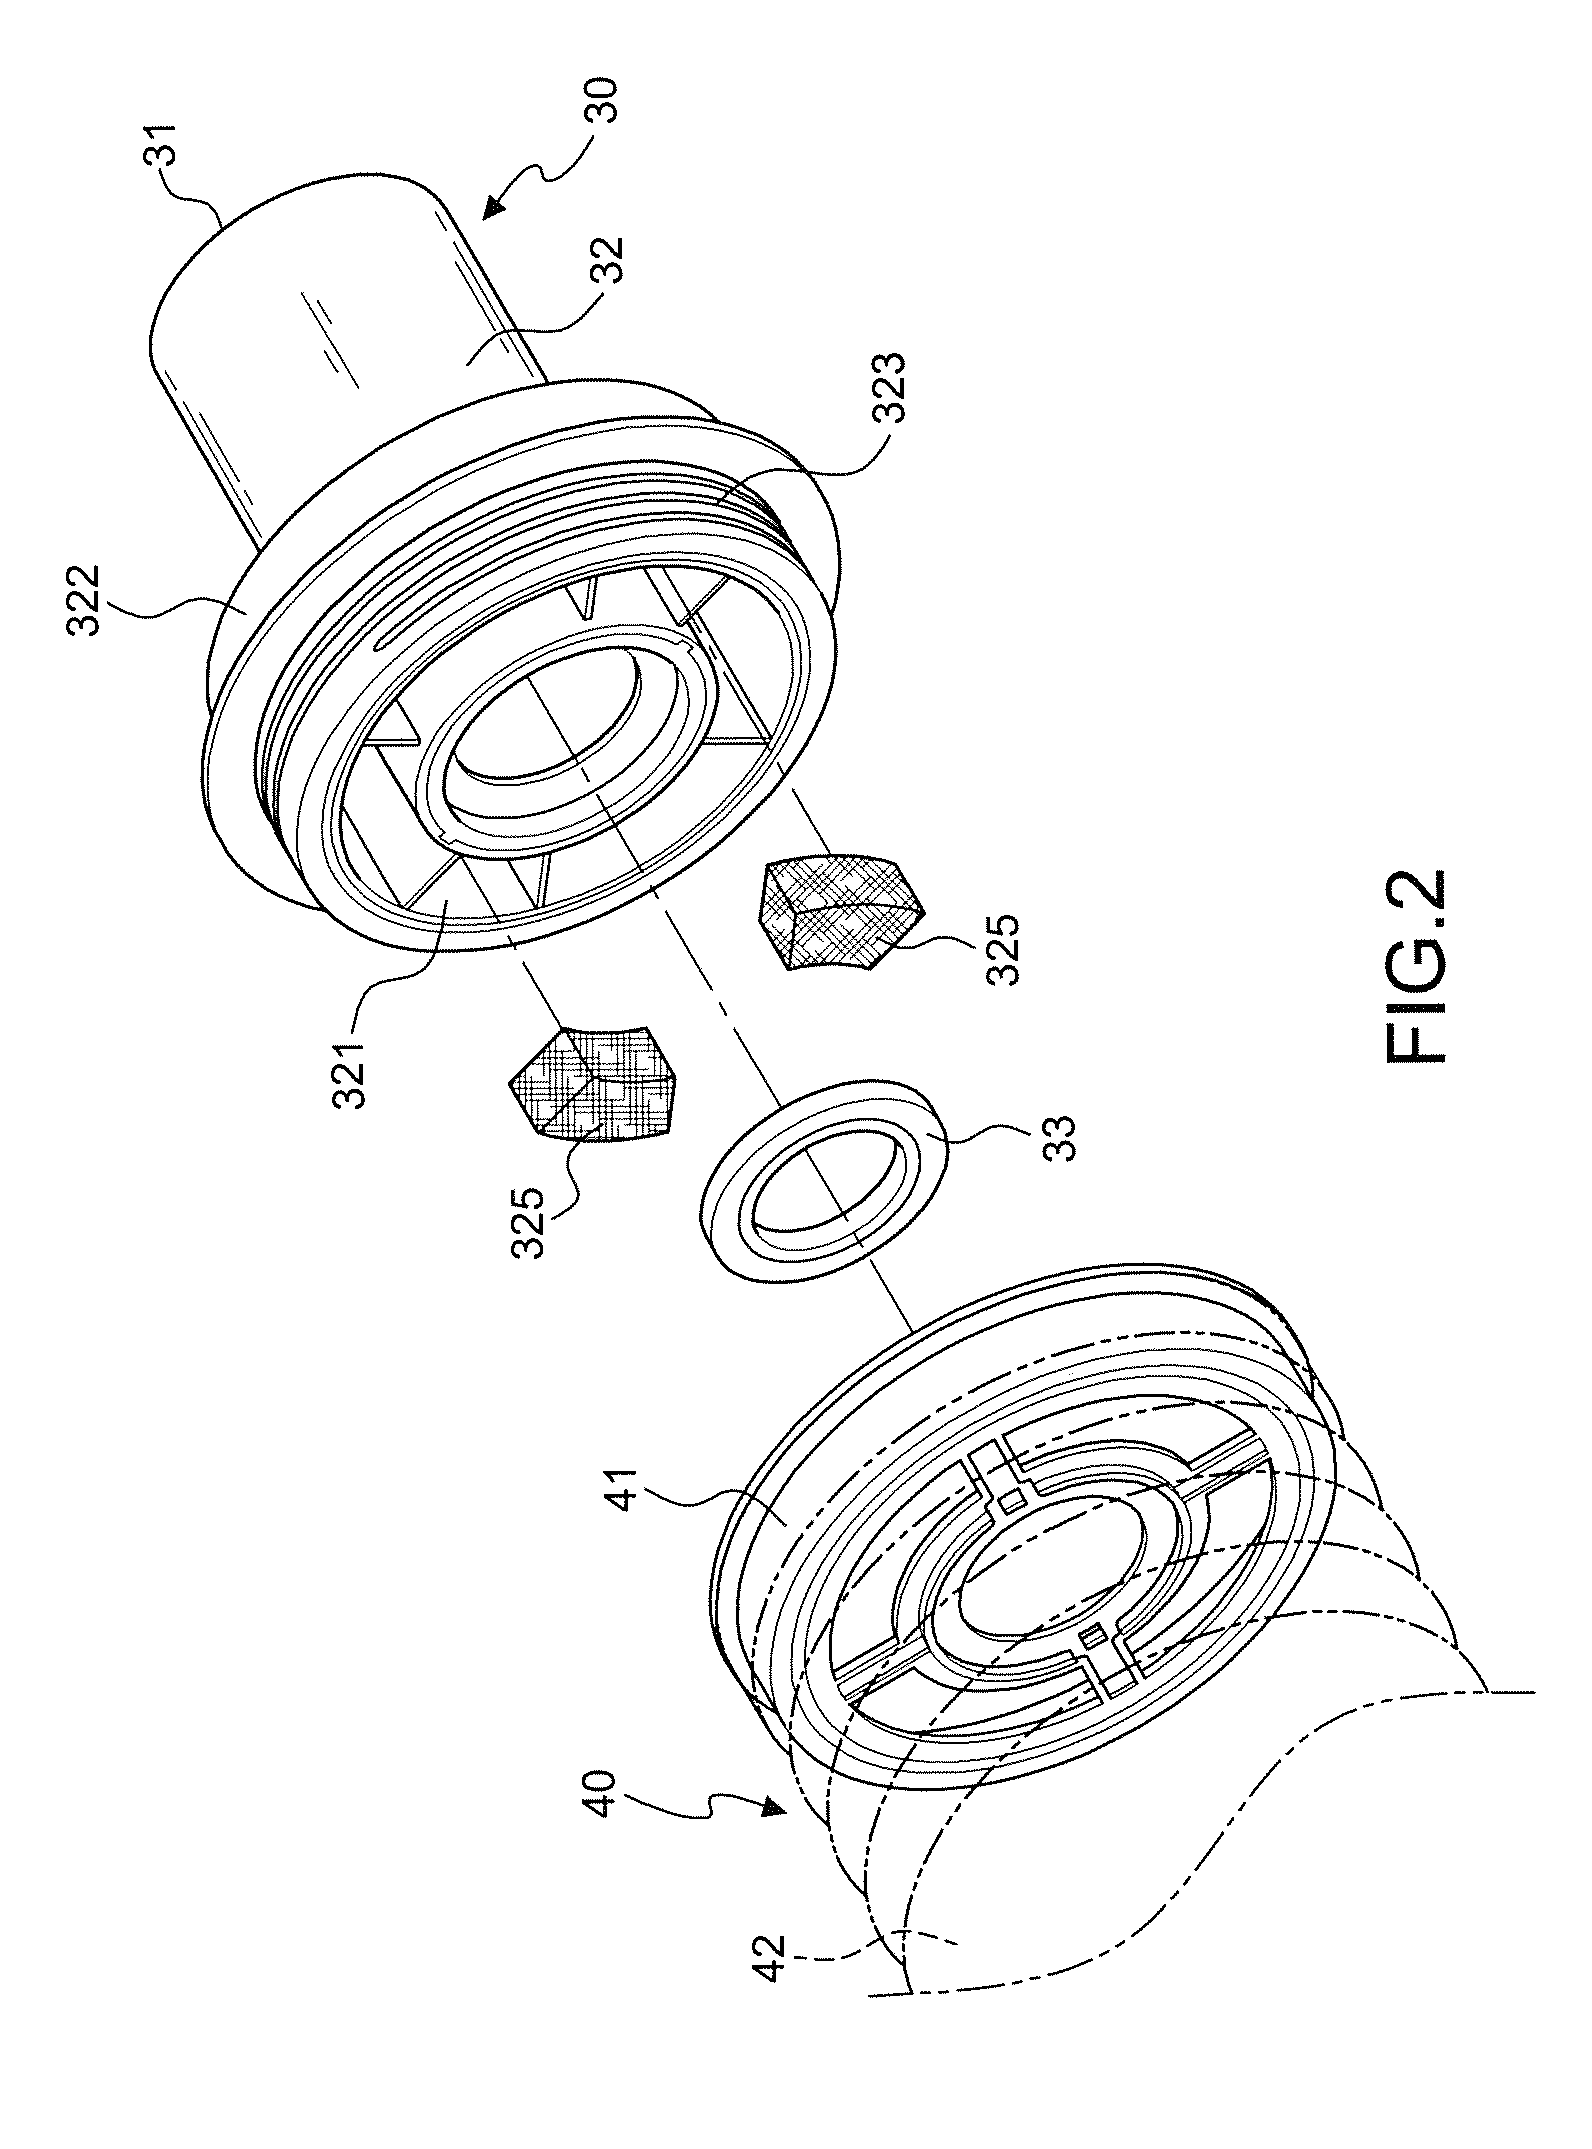 Positioning sleeve for electrical drill dust collector and electrical drill dust collector using the positioning sleeve